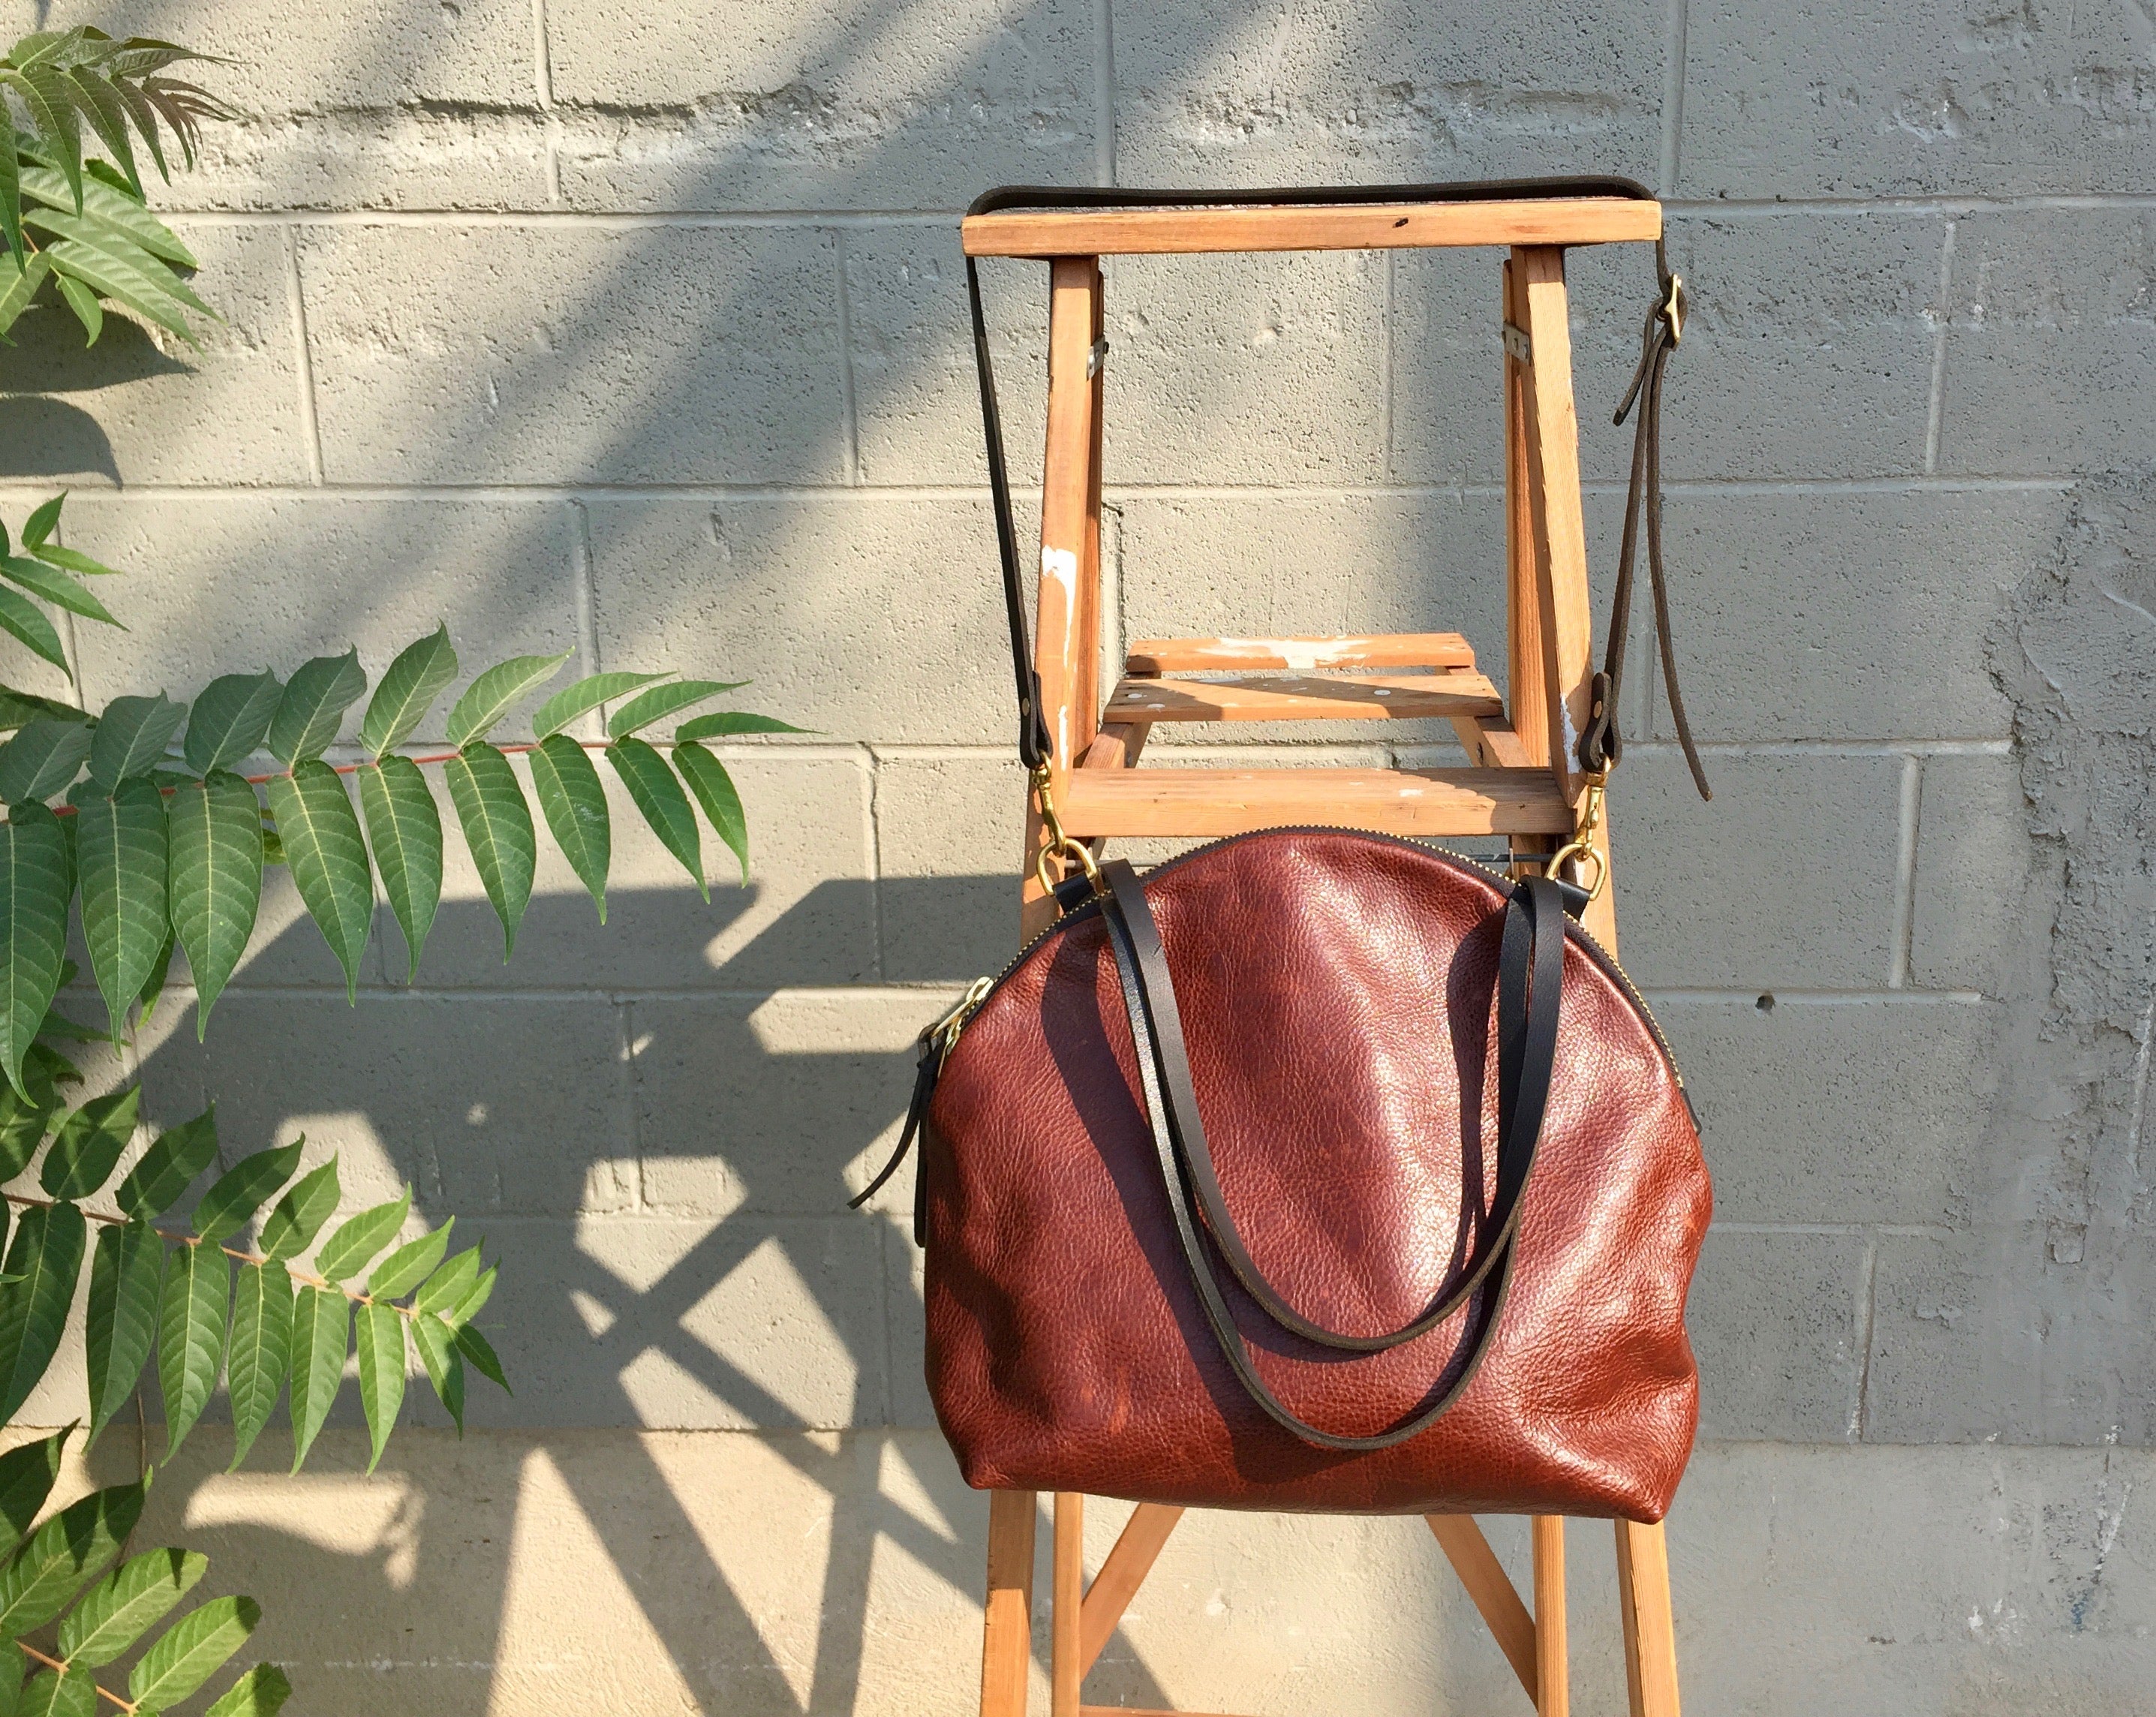 Oxblood Rustic Le Zip Sac Tote by Clare V. for $20